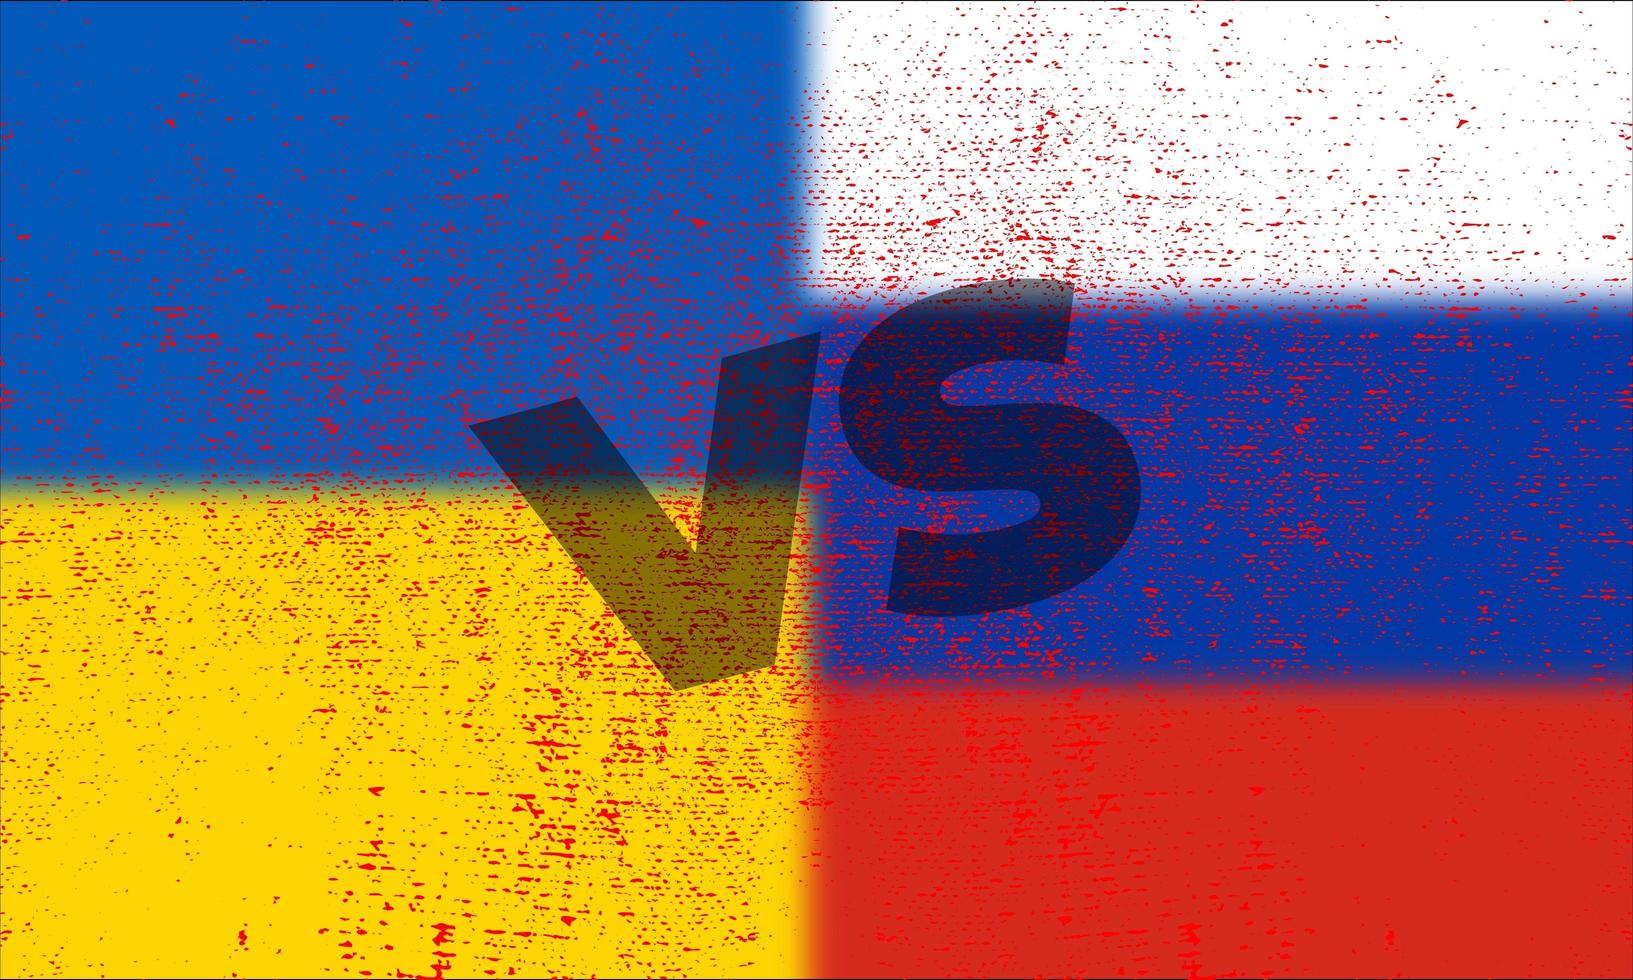 Russia vs Ukraine with grunge country flag vector illustration. War crisis and political conflict concept photo